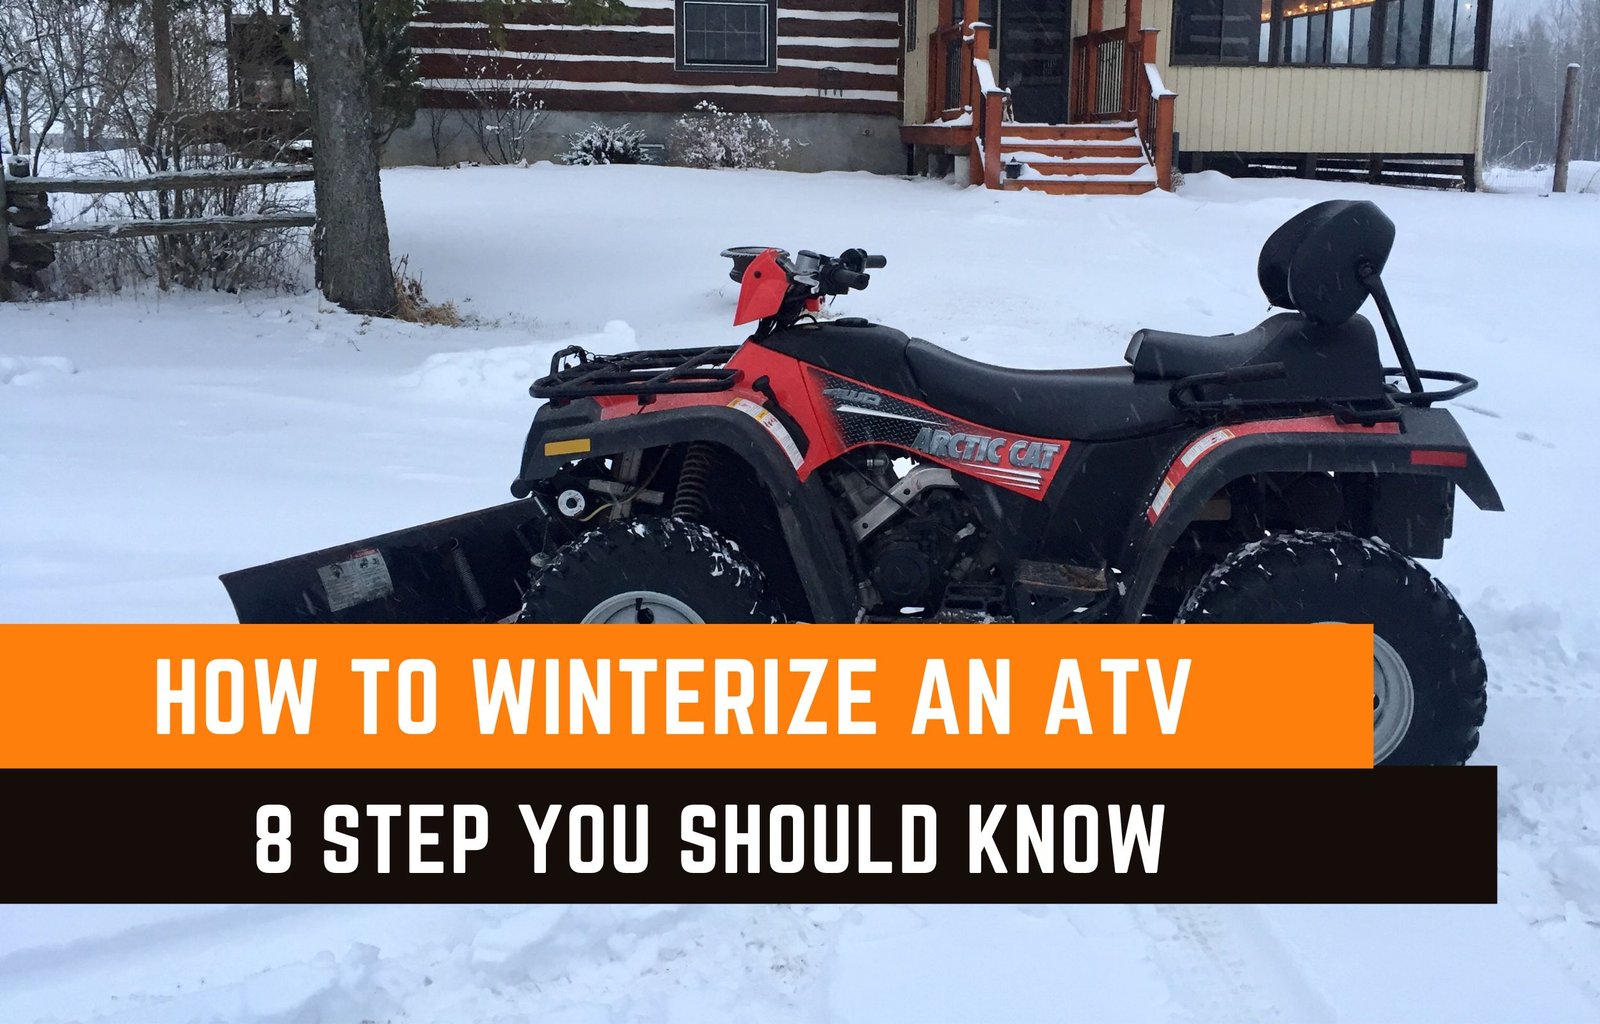 How To Winterize An ATV